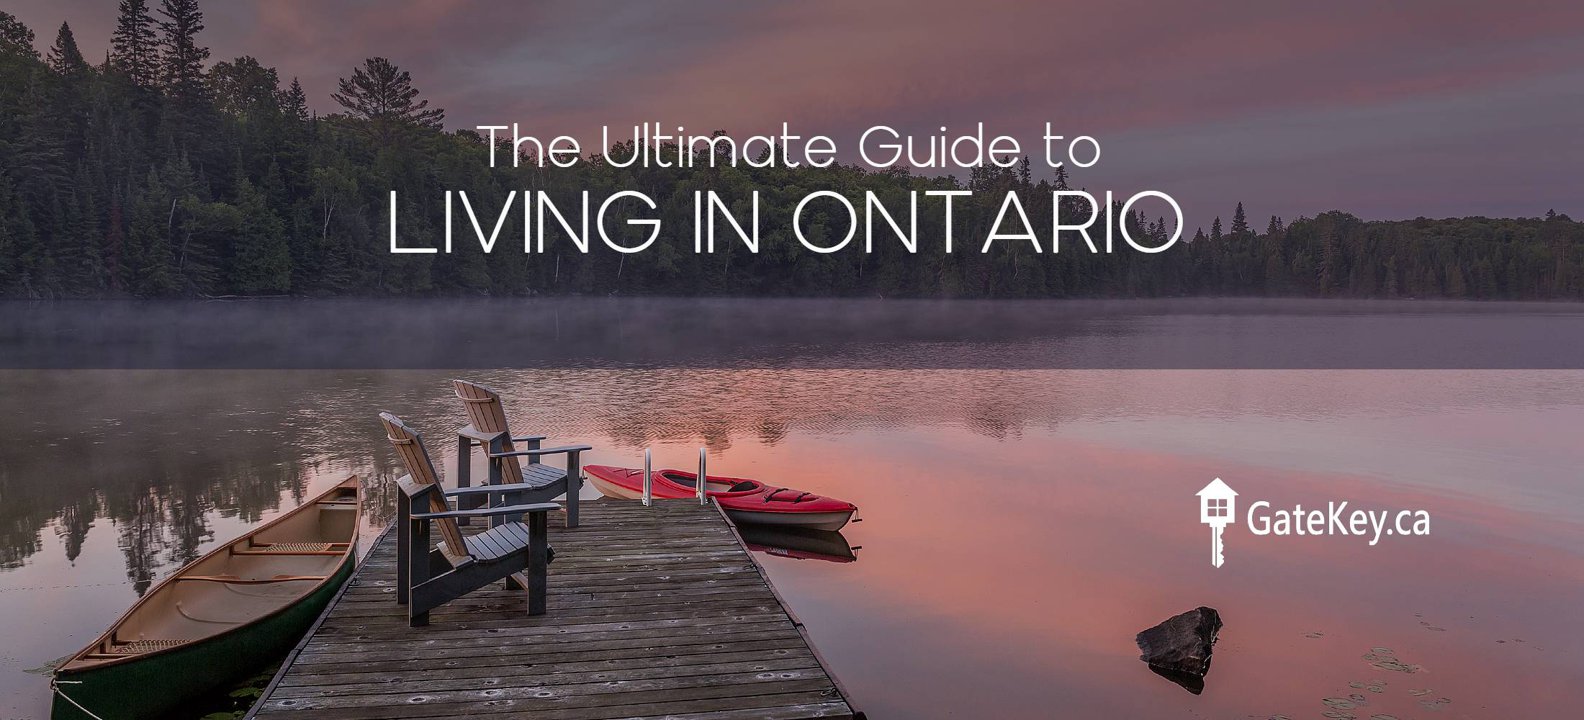 Moving to Ontario? The Ultimate Guide to Living in Ontario, Canada